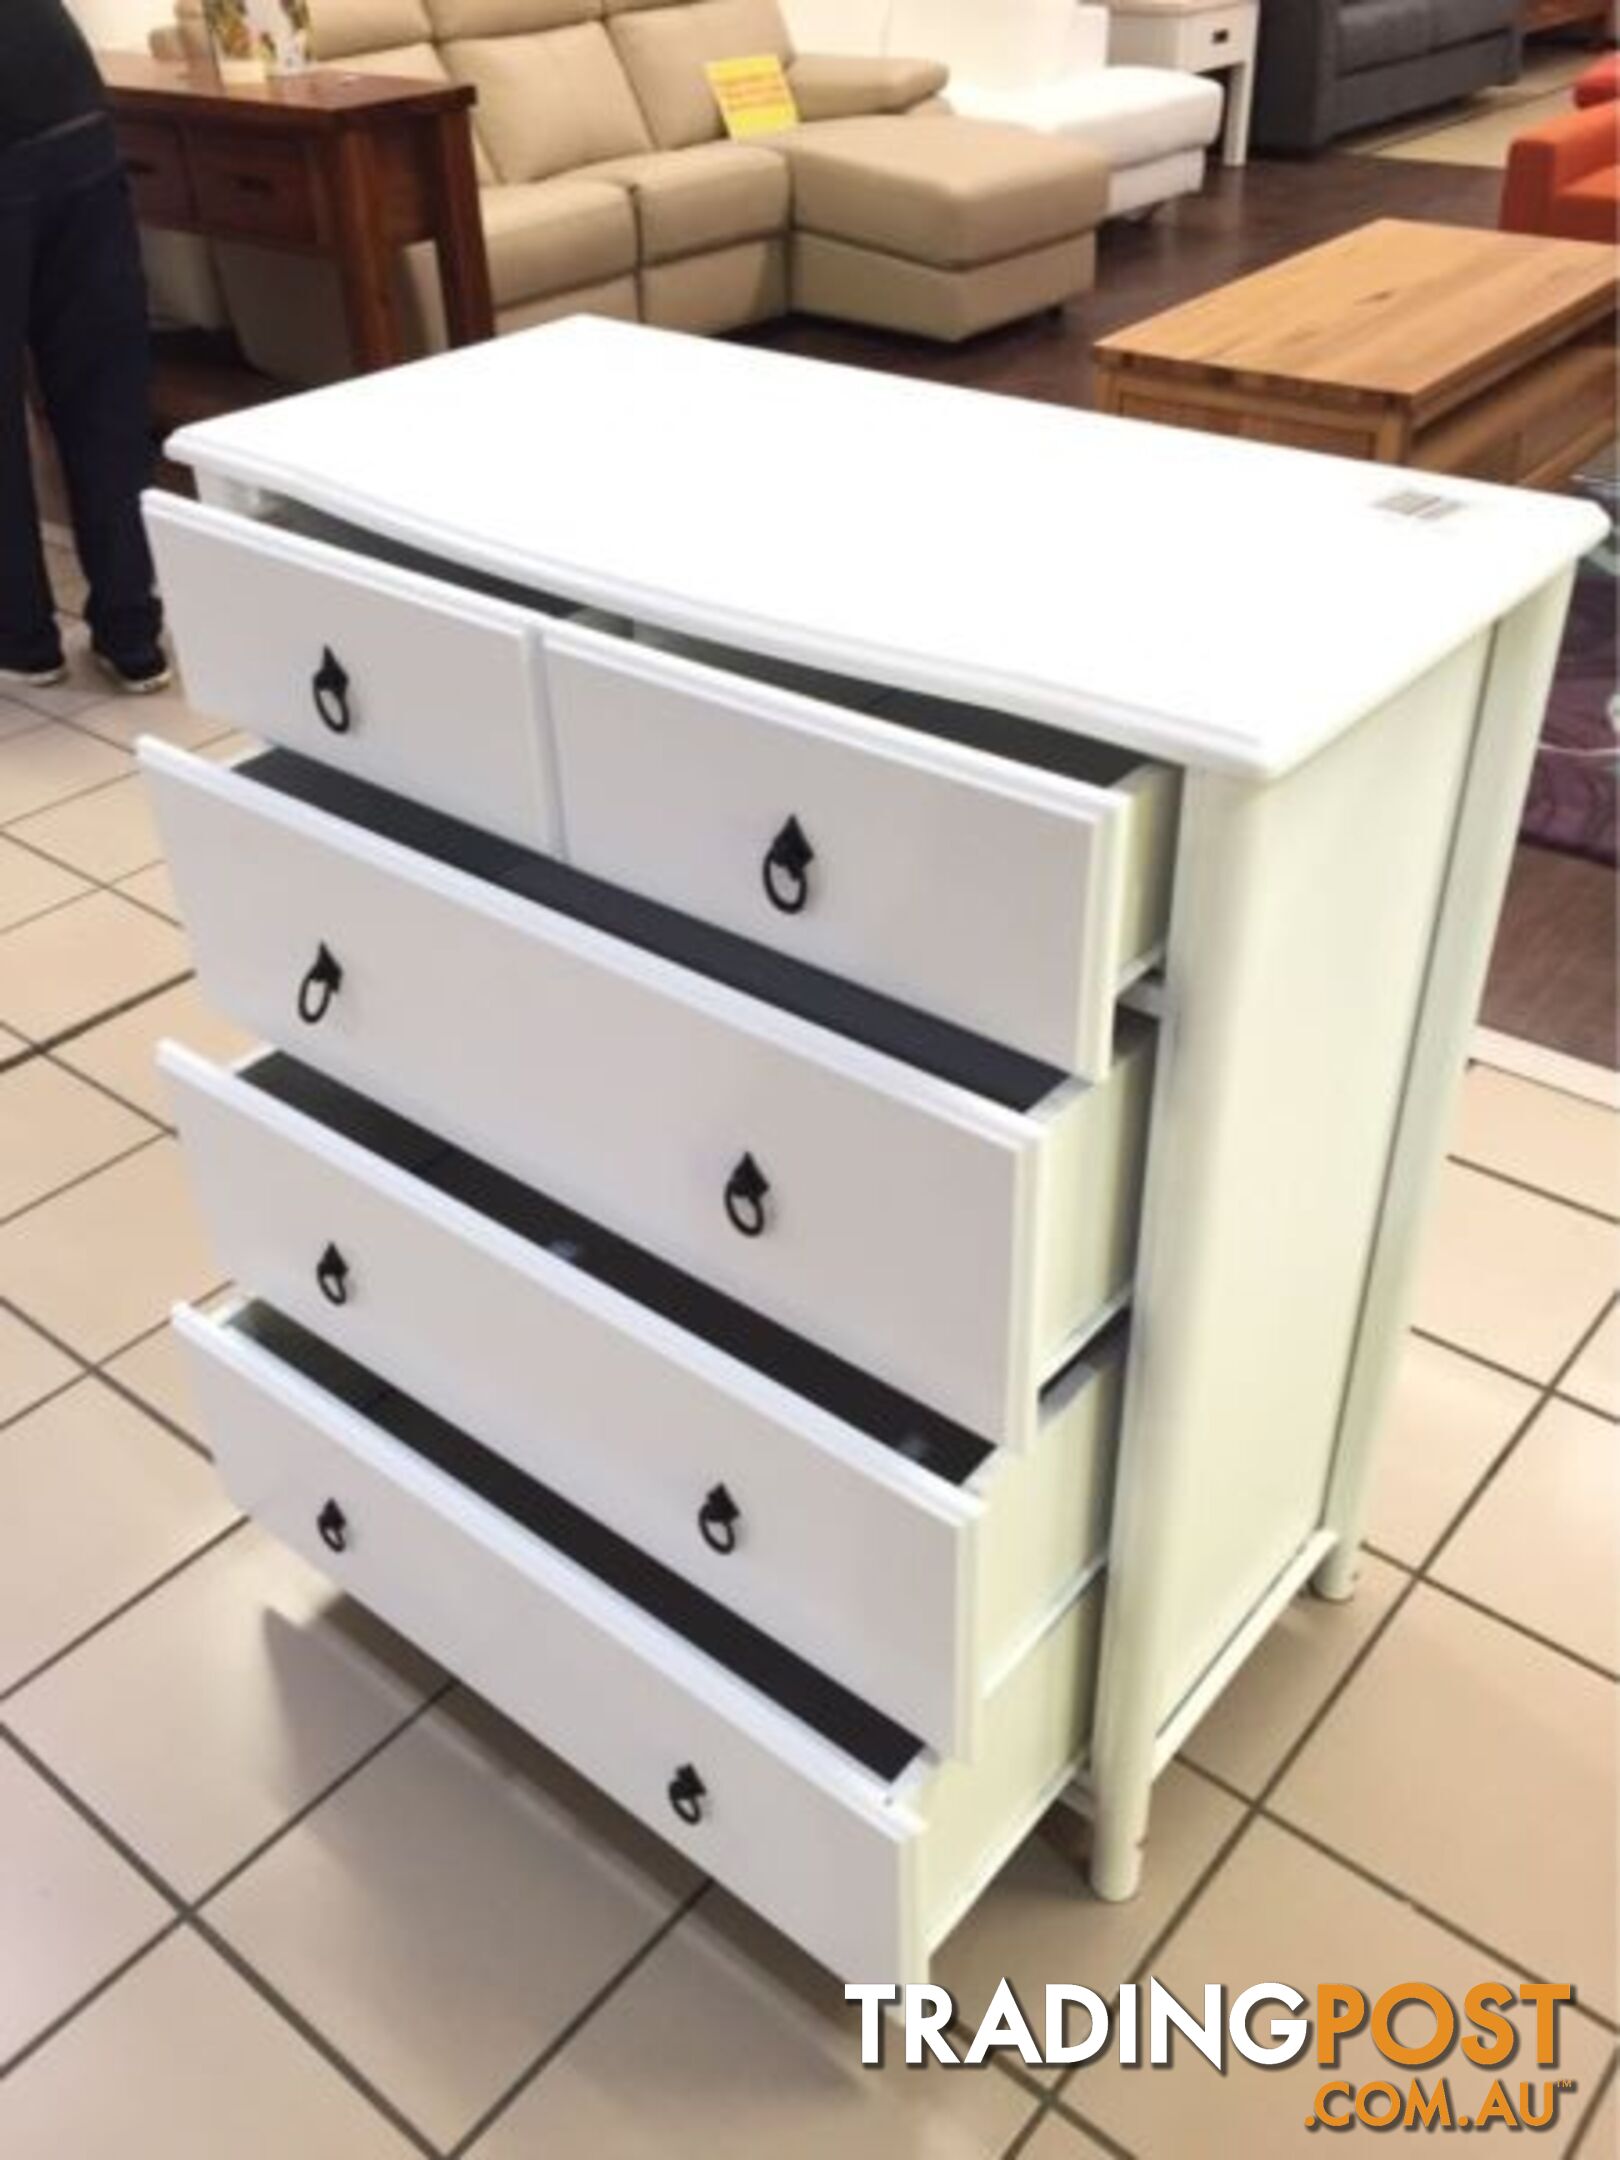 KATIE 5 DRAWER TALL CHEST